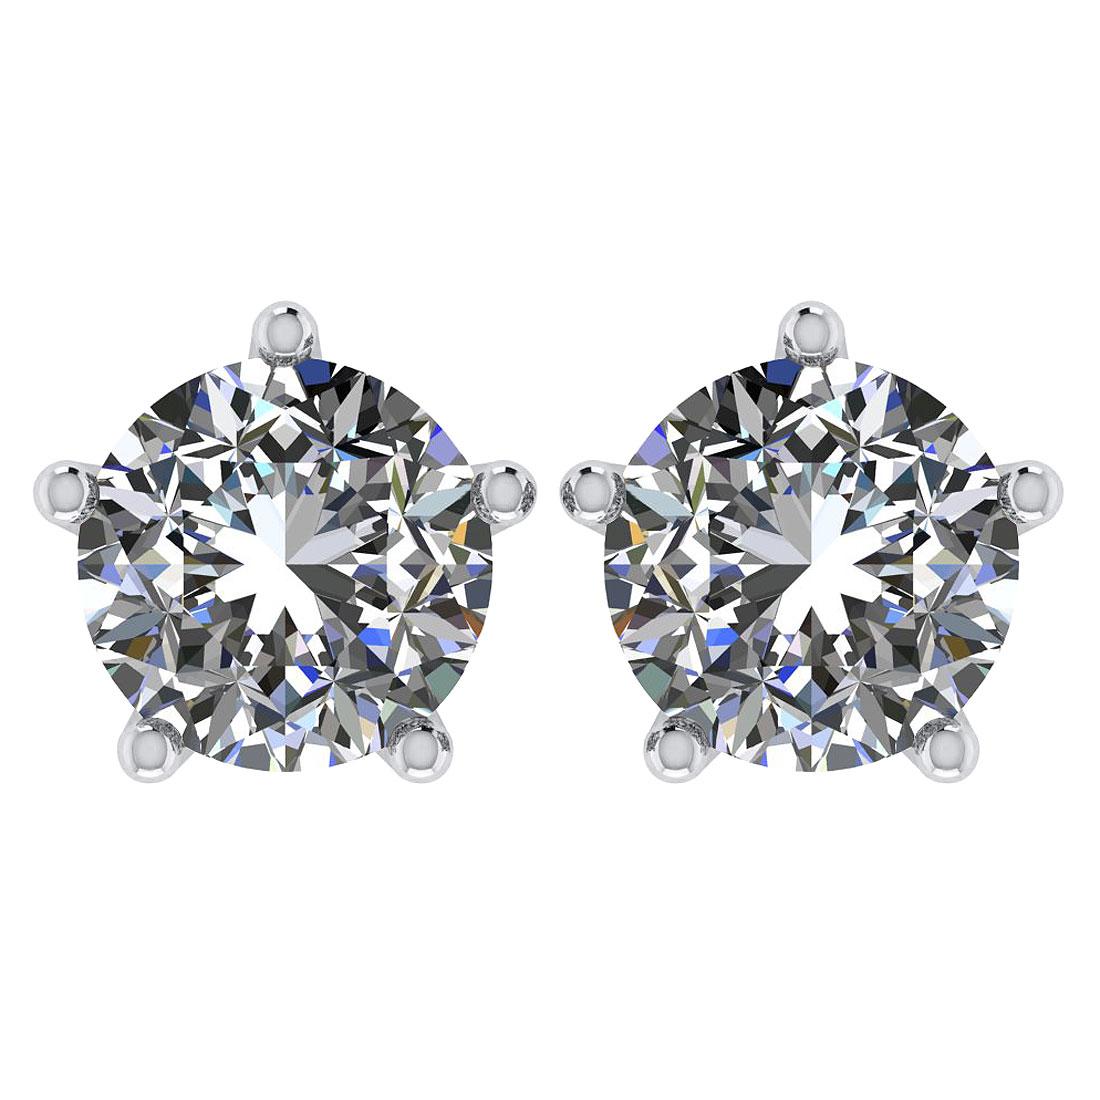 CERTIFIED 1.52 CTW ROUND G/SI2 DIAMOND (LAB GROWN Certified DIAMOND SOLITAIRE EARRINGS ) IN 14K YELL